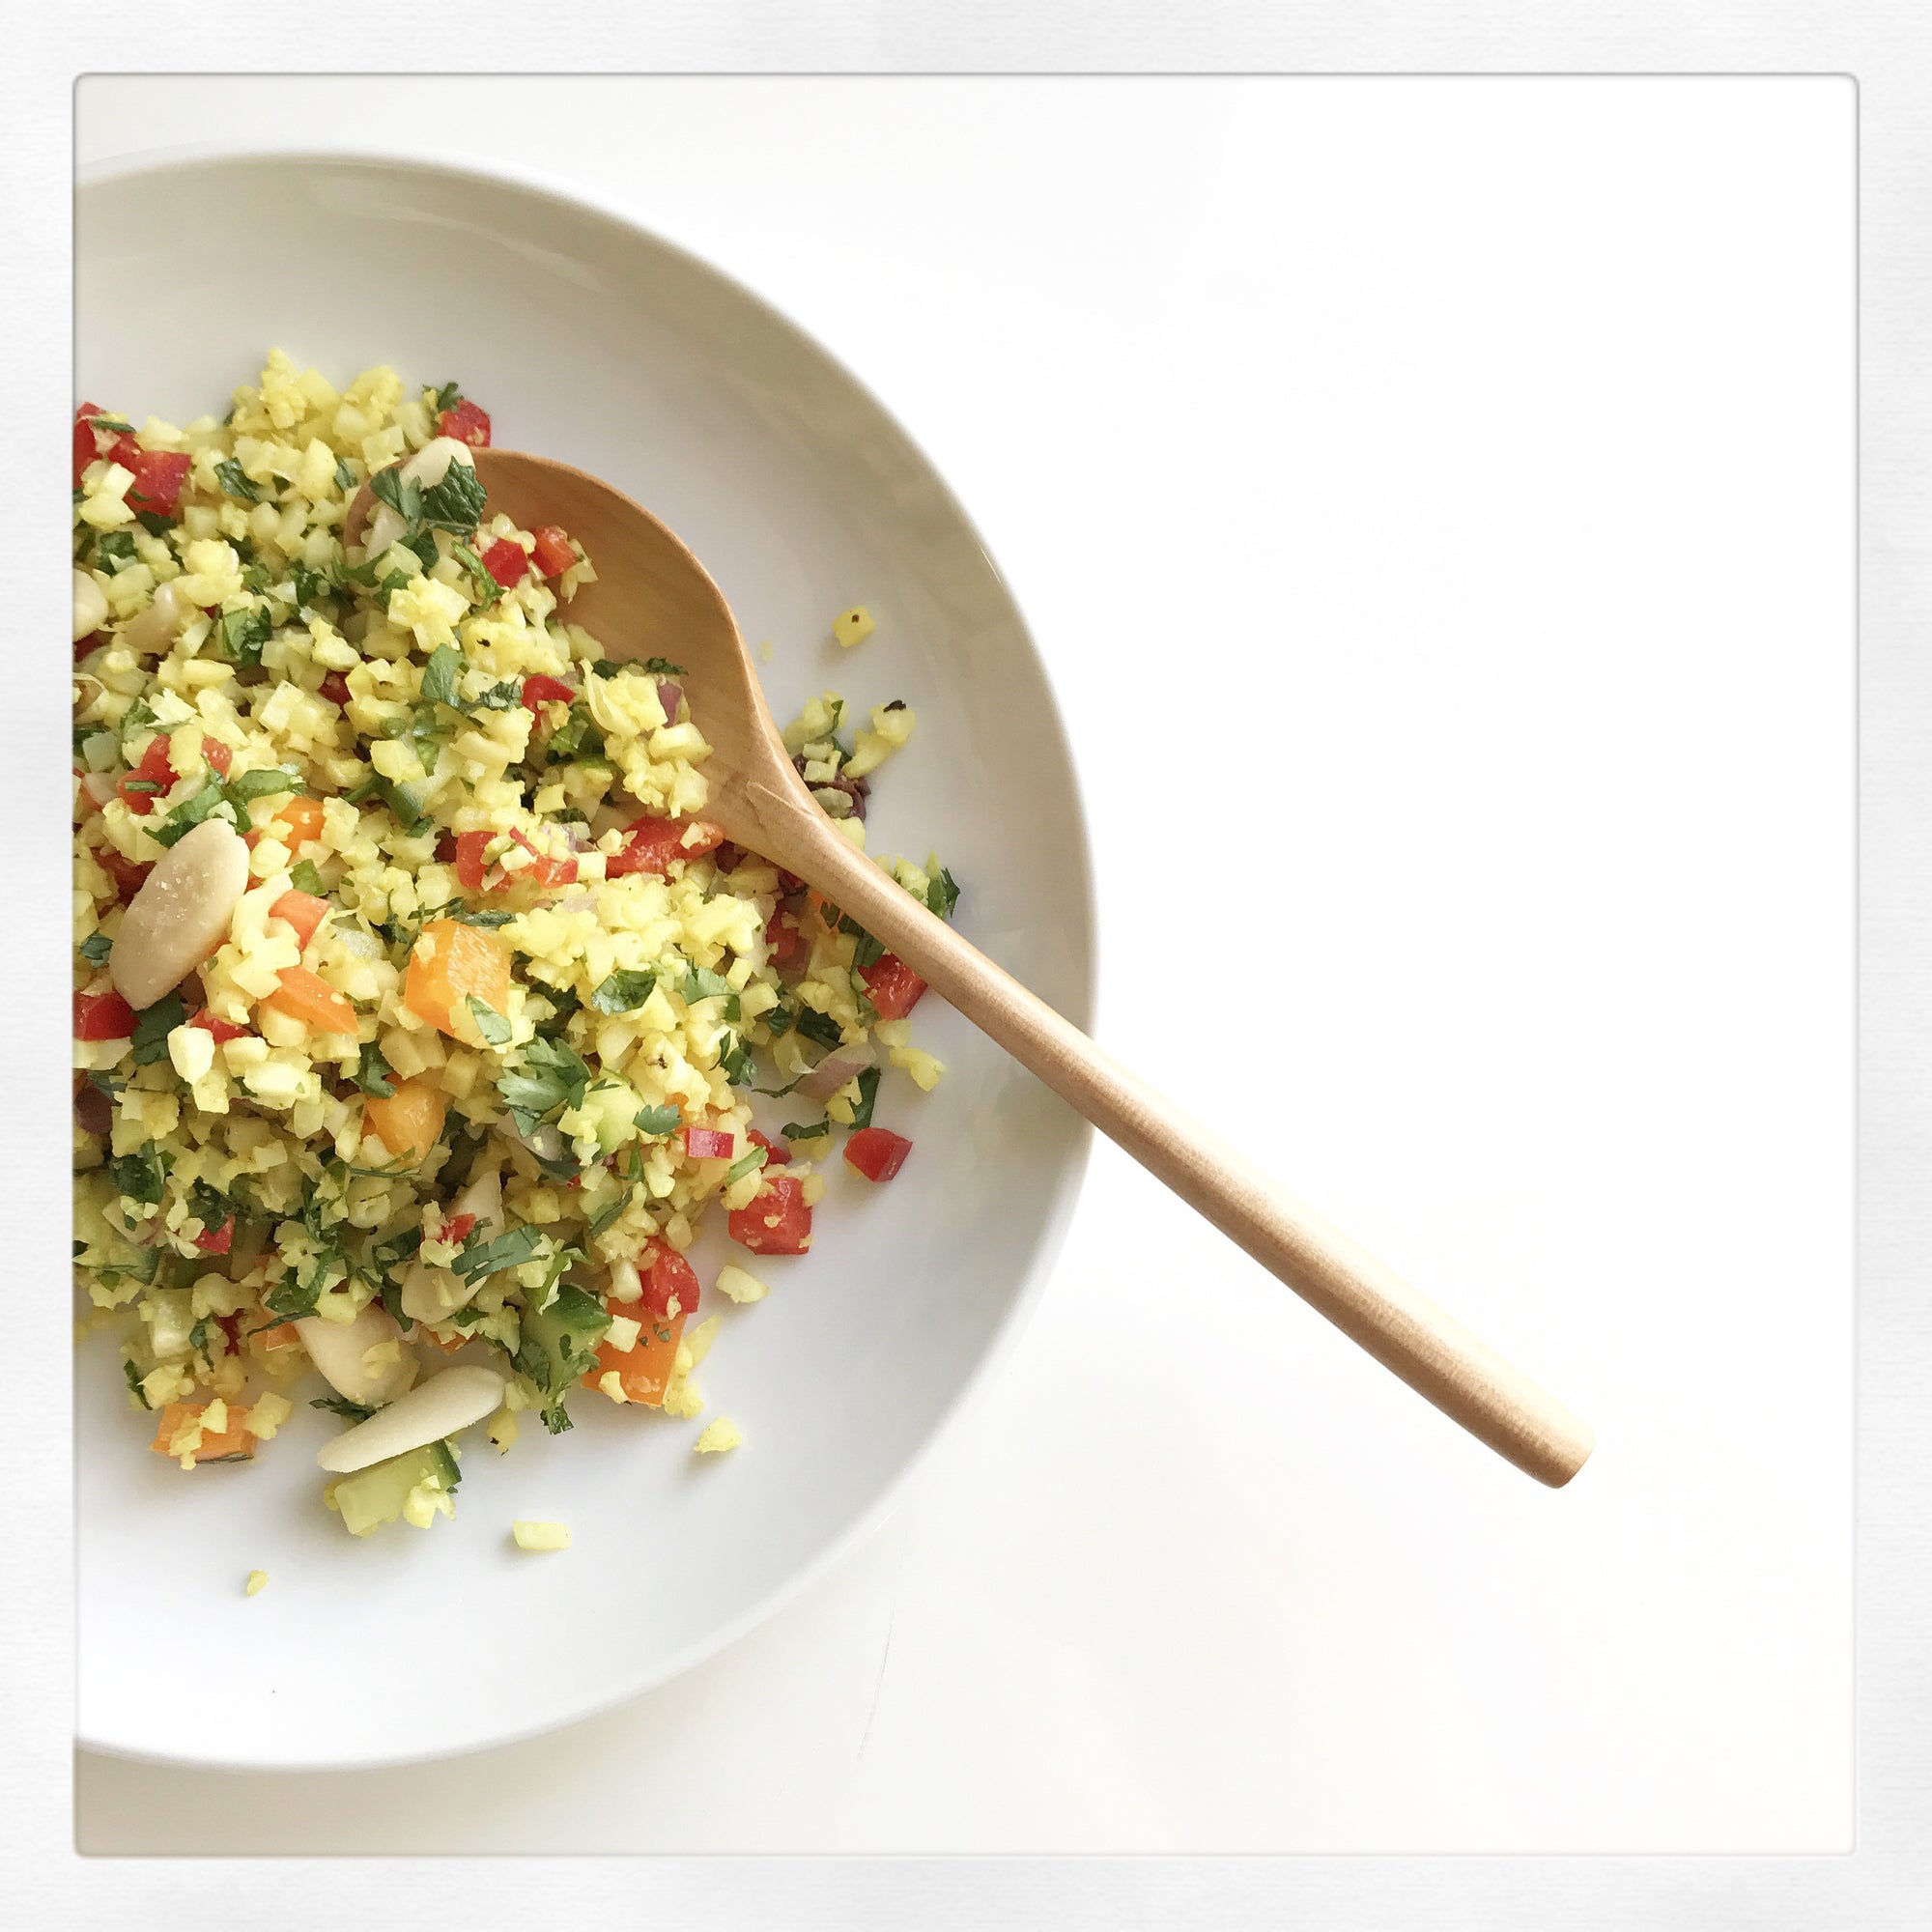 Pili Nut Golden Cauliflower Couscous from Whitney Aronoff